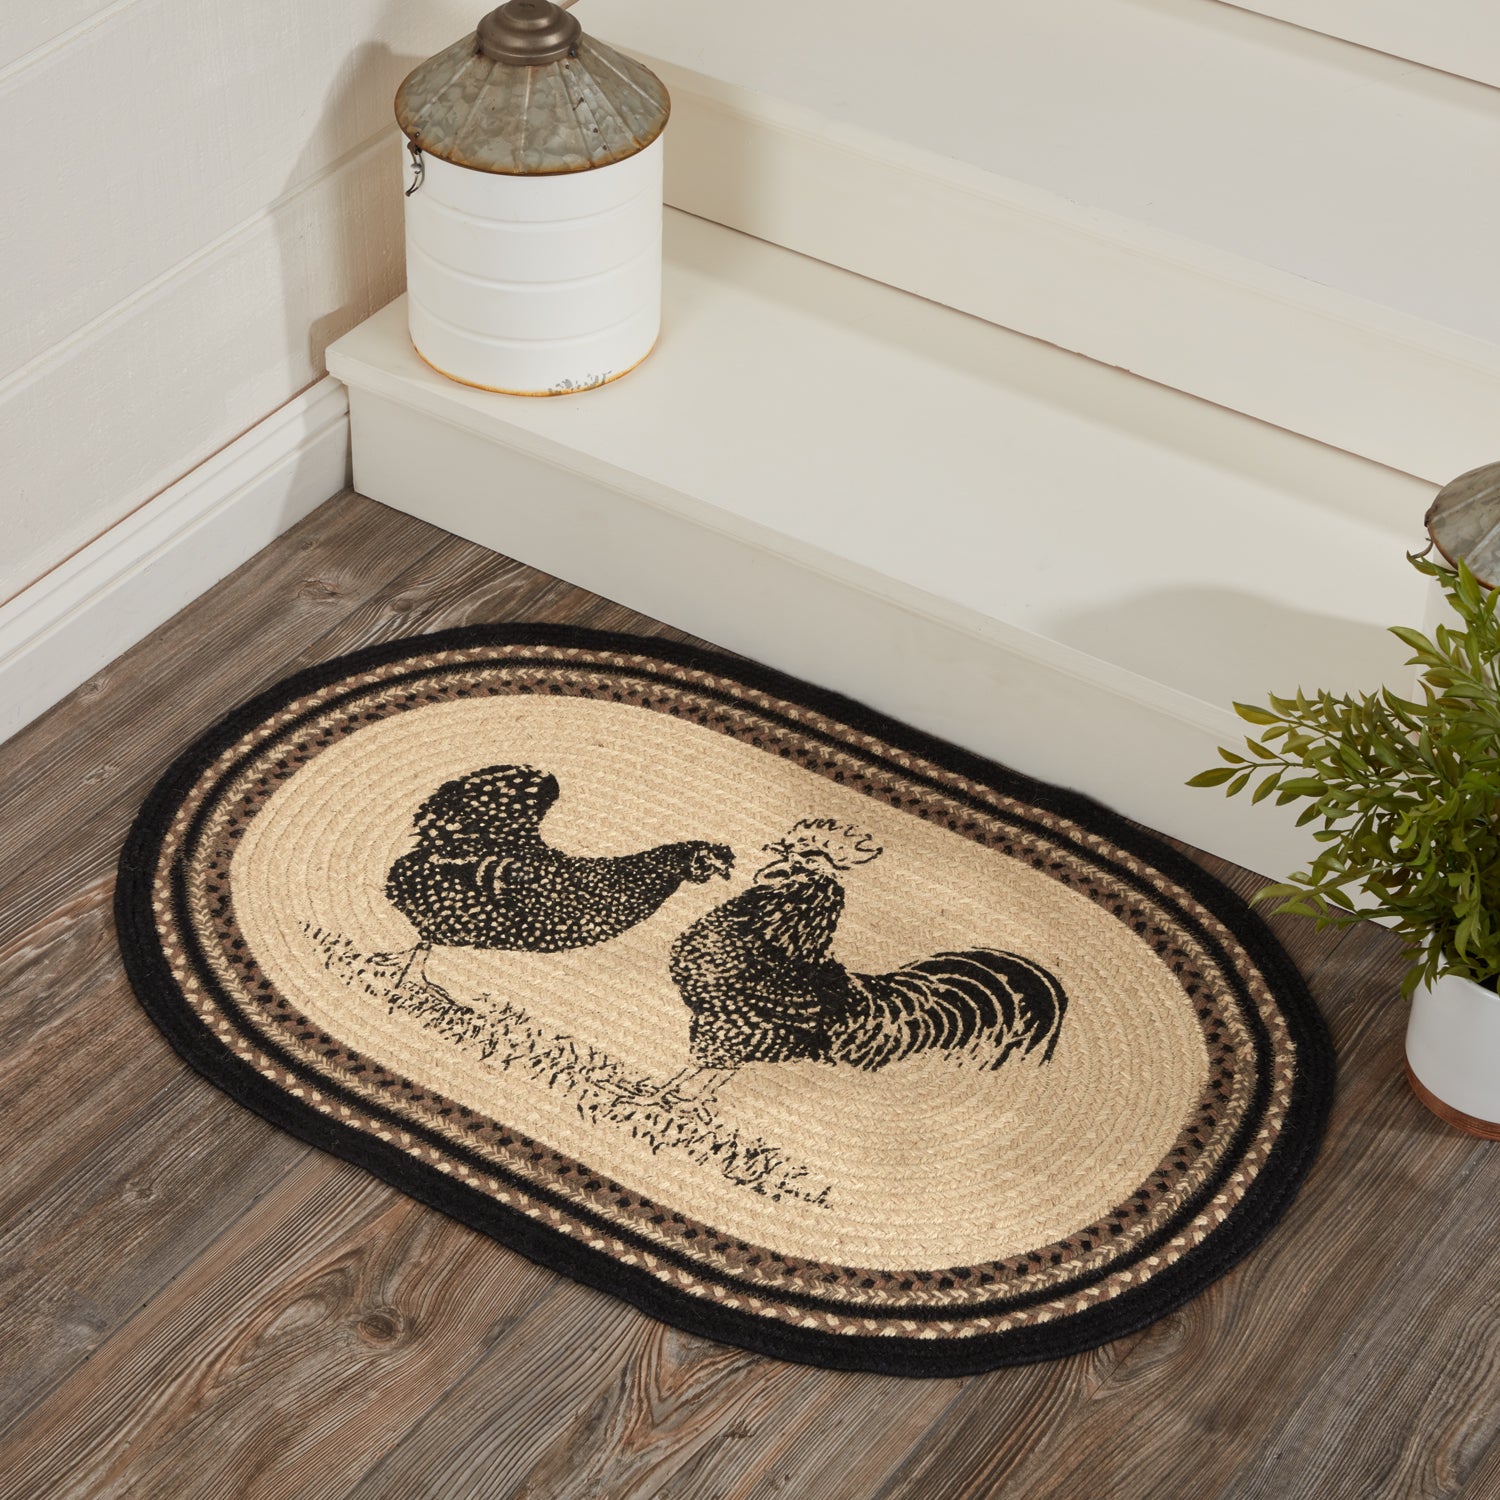 69391-Sawyer-Mill-Charcoal-Poultry-Jute-Rug-Oval-w-Pad-20x30-image-1